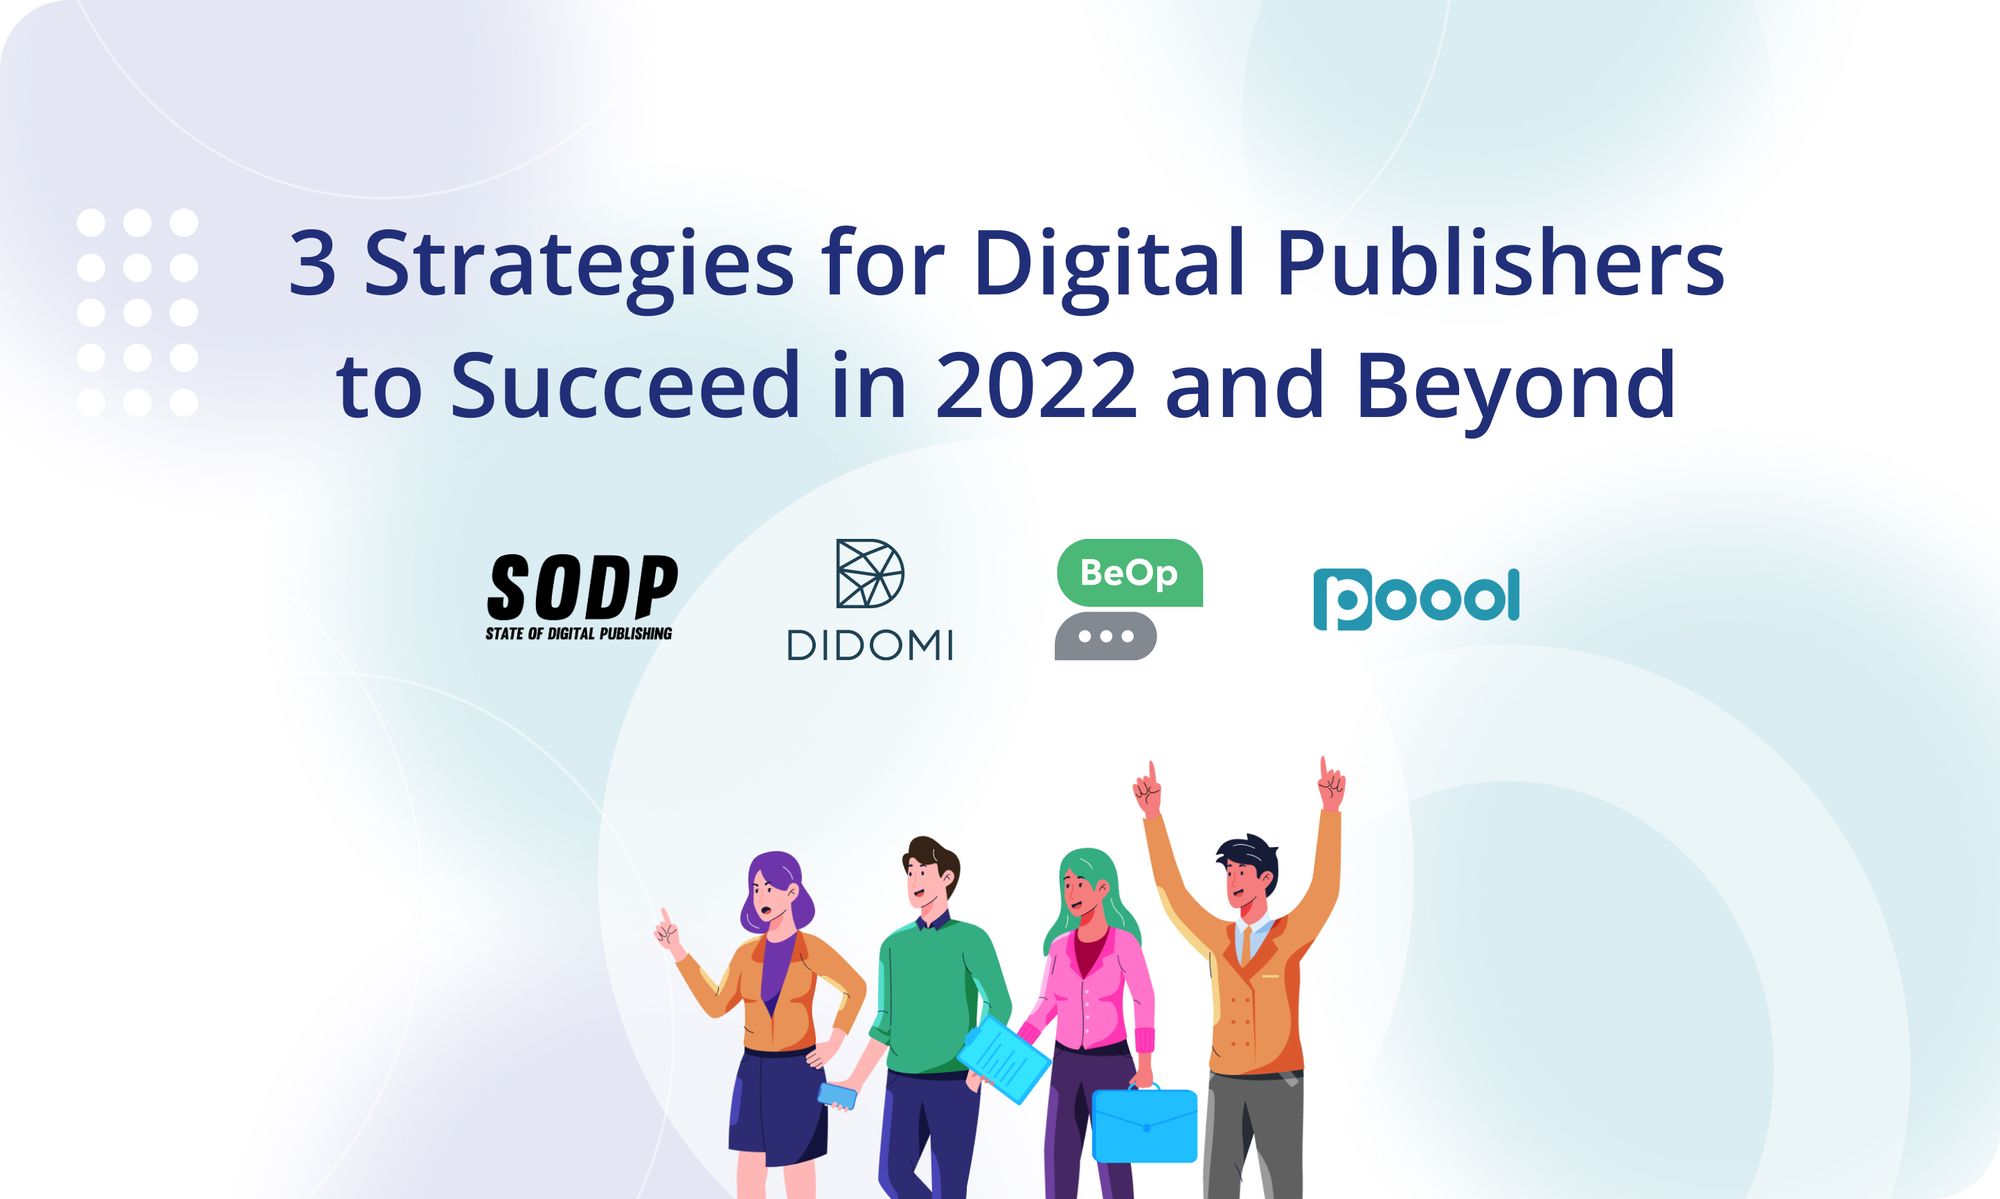 3 Strategies for Digital Publishers to Succeed in 2022 and Beyond.